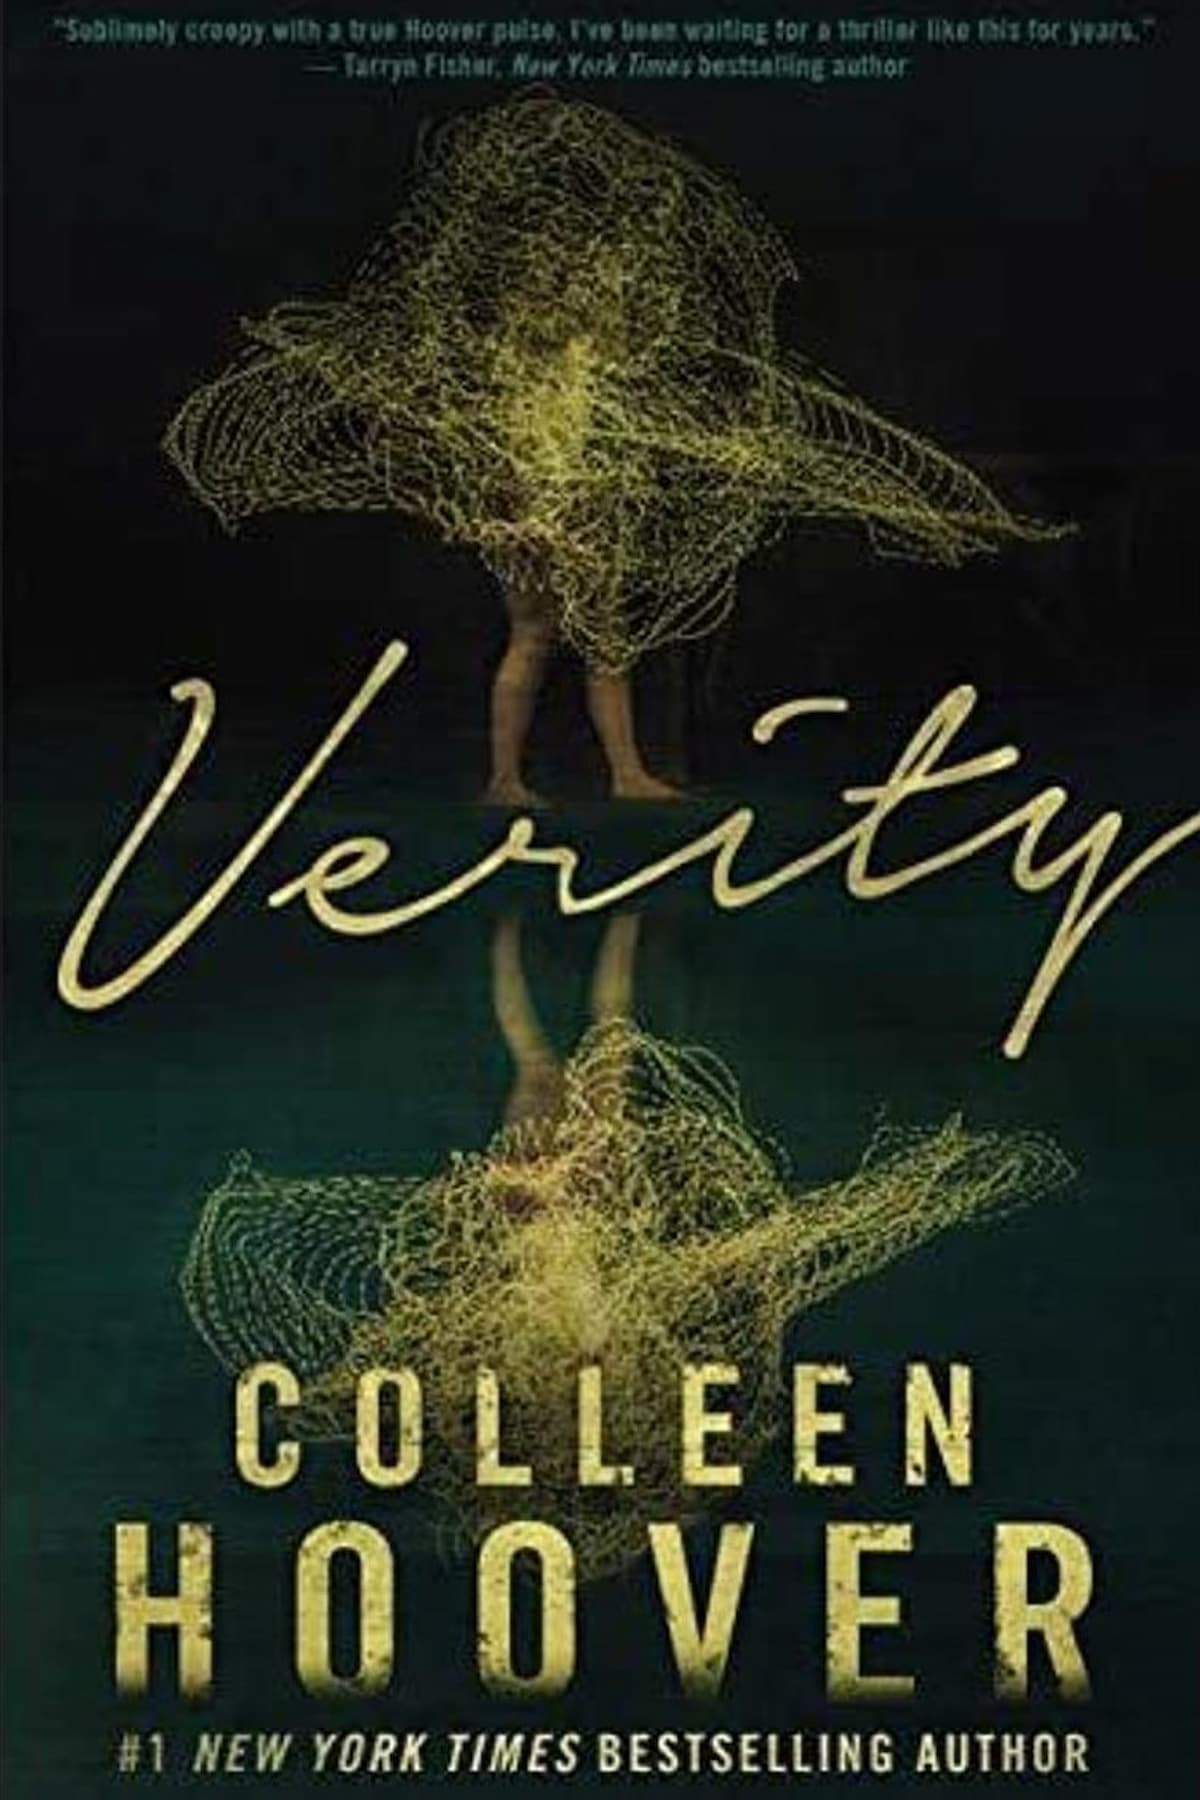 Colleen Hoover Books In Order, Contemporary Romance, Fiction, Noteworthy, Noteworthy Spotlight, Psychological Thrillers, Romantic Suspense, Thrillers, Verity - Colleen Hoover